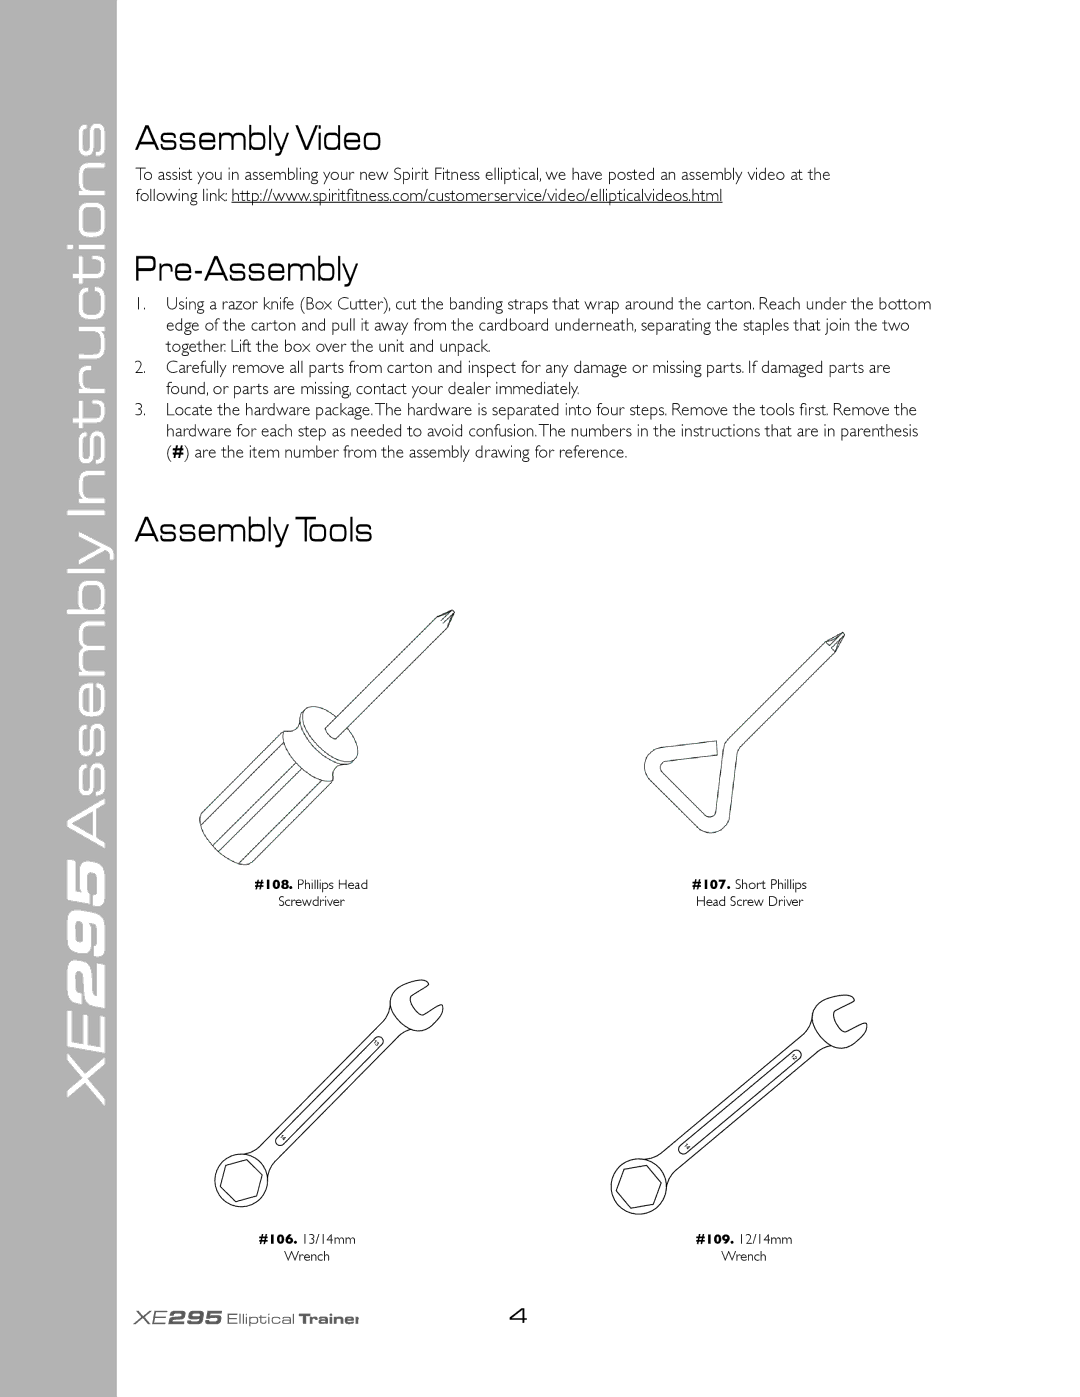 Spirit owner manual XE295 Assembly Instructions, Assembly Video Pre-Assembly, Assembly Tools 